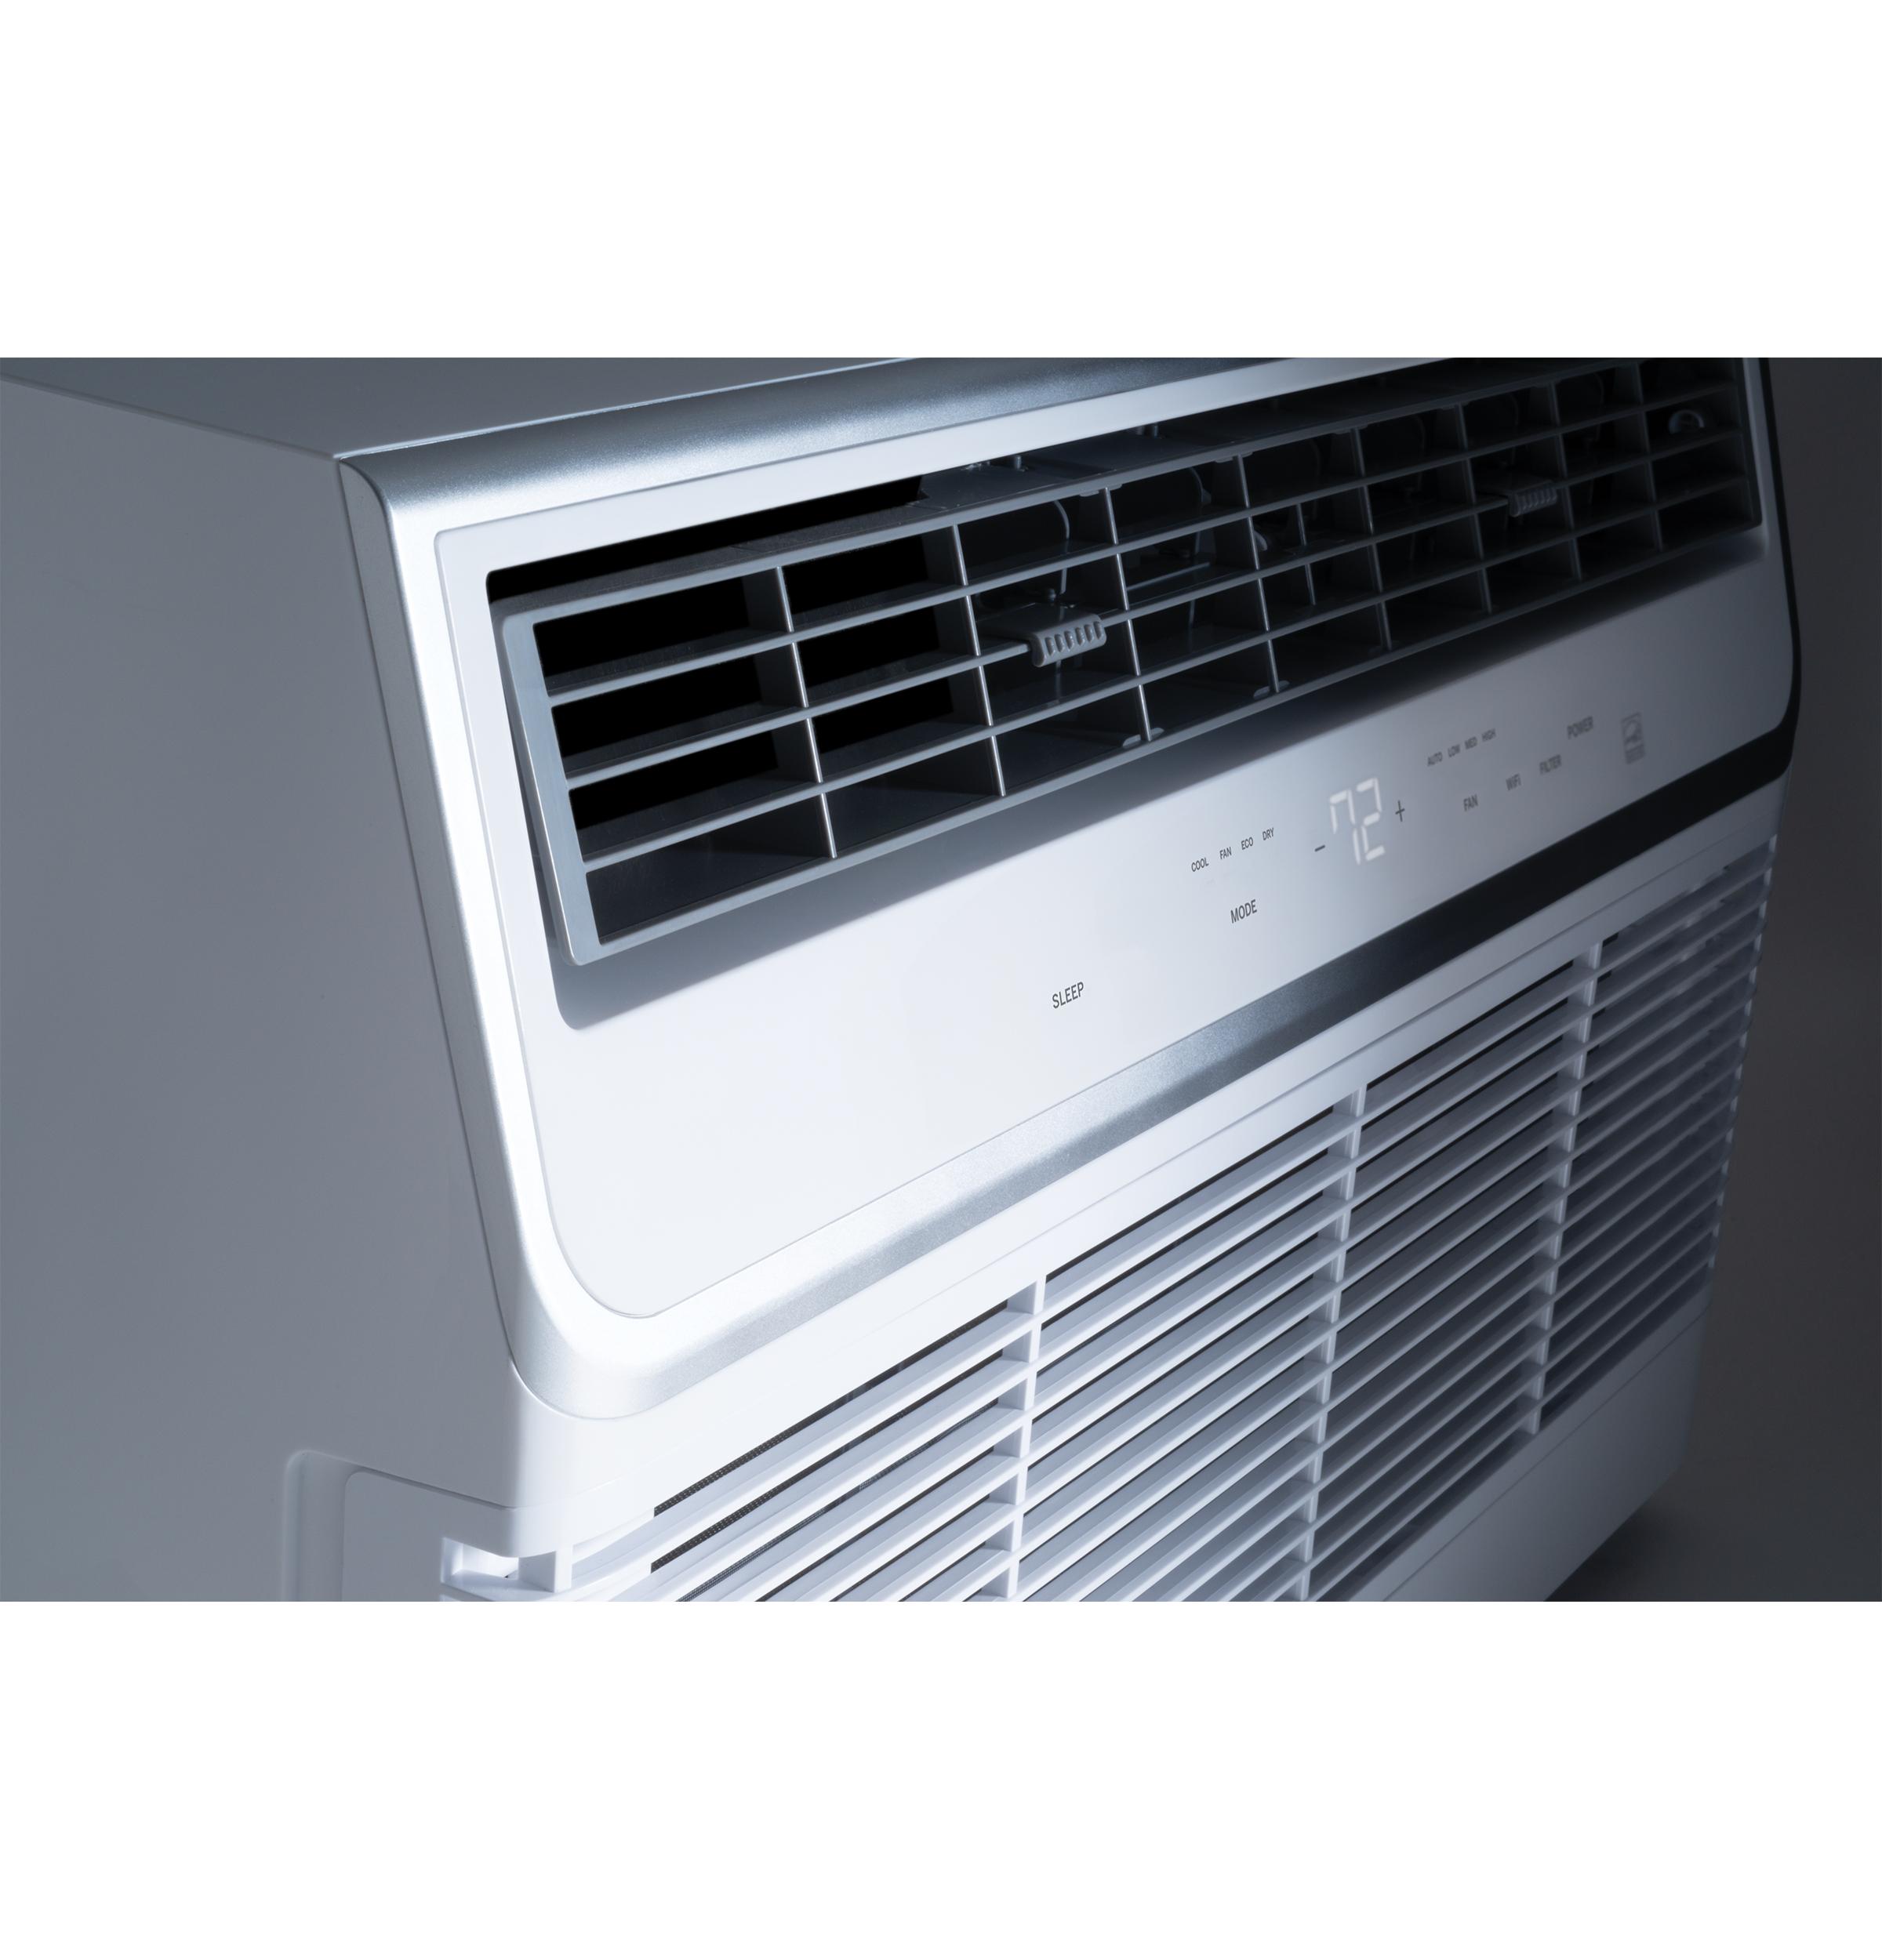 GE® ENERGY STAR® 230/208V Cool-Only 10,000 BTU Built-In Room Air Conditioner